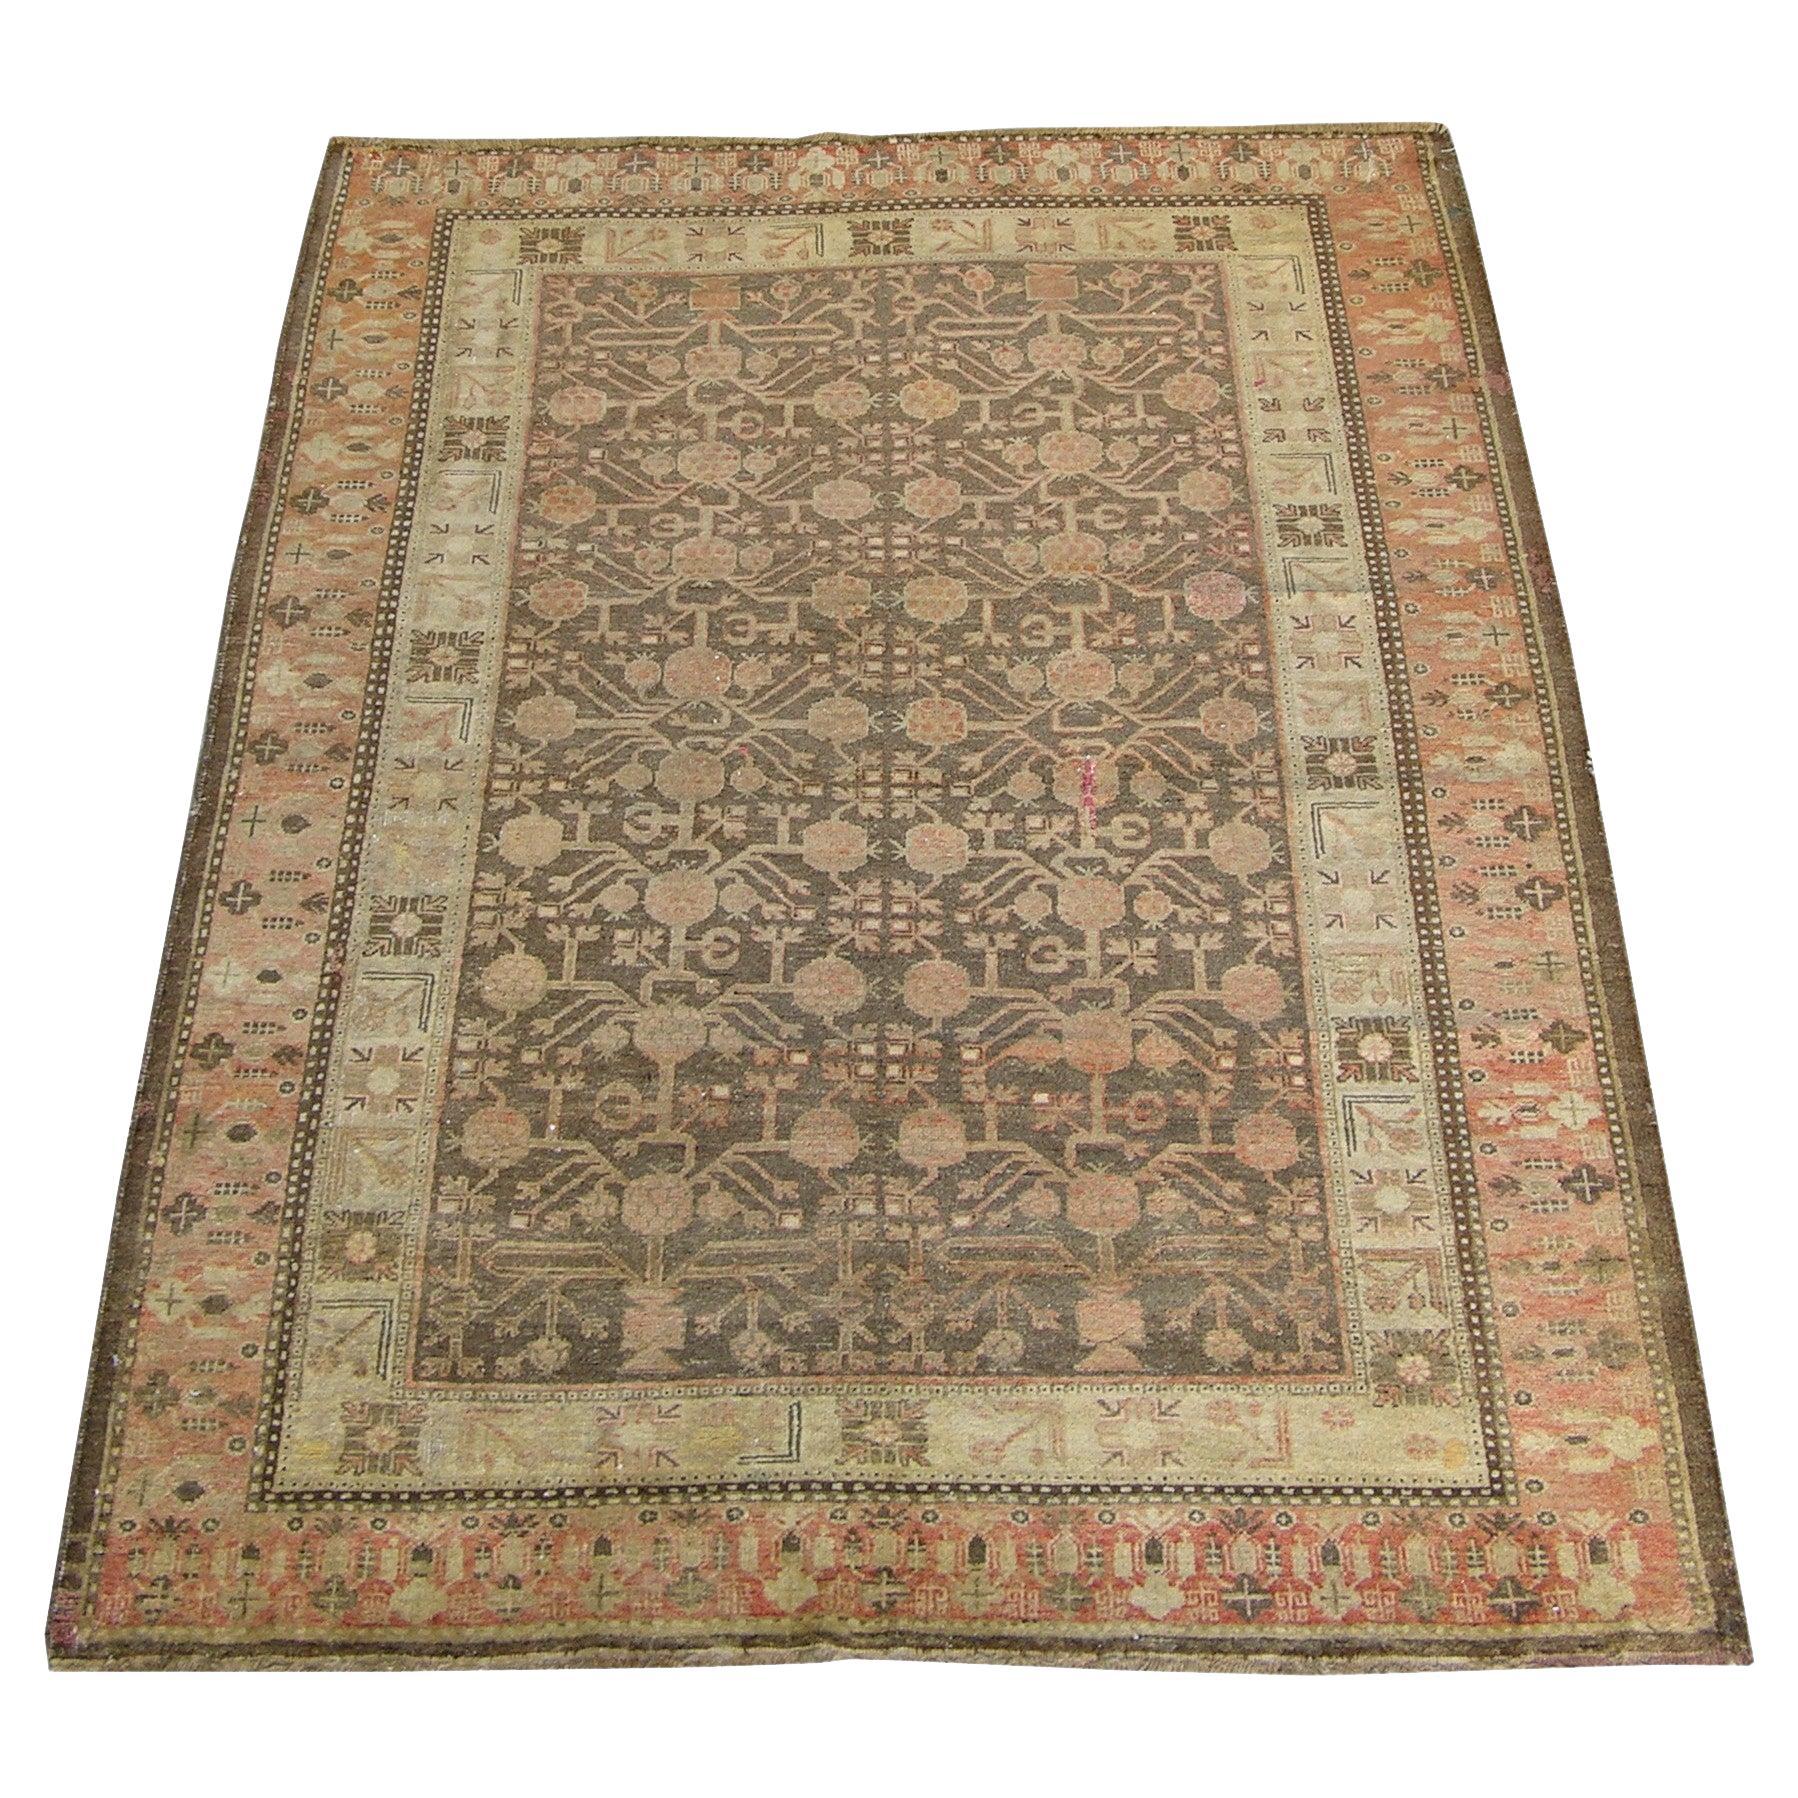 1900s Century Antique Samarkand Rug 6.6" X 4.6" For Sale